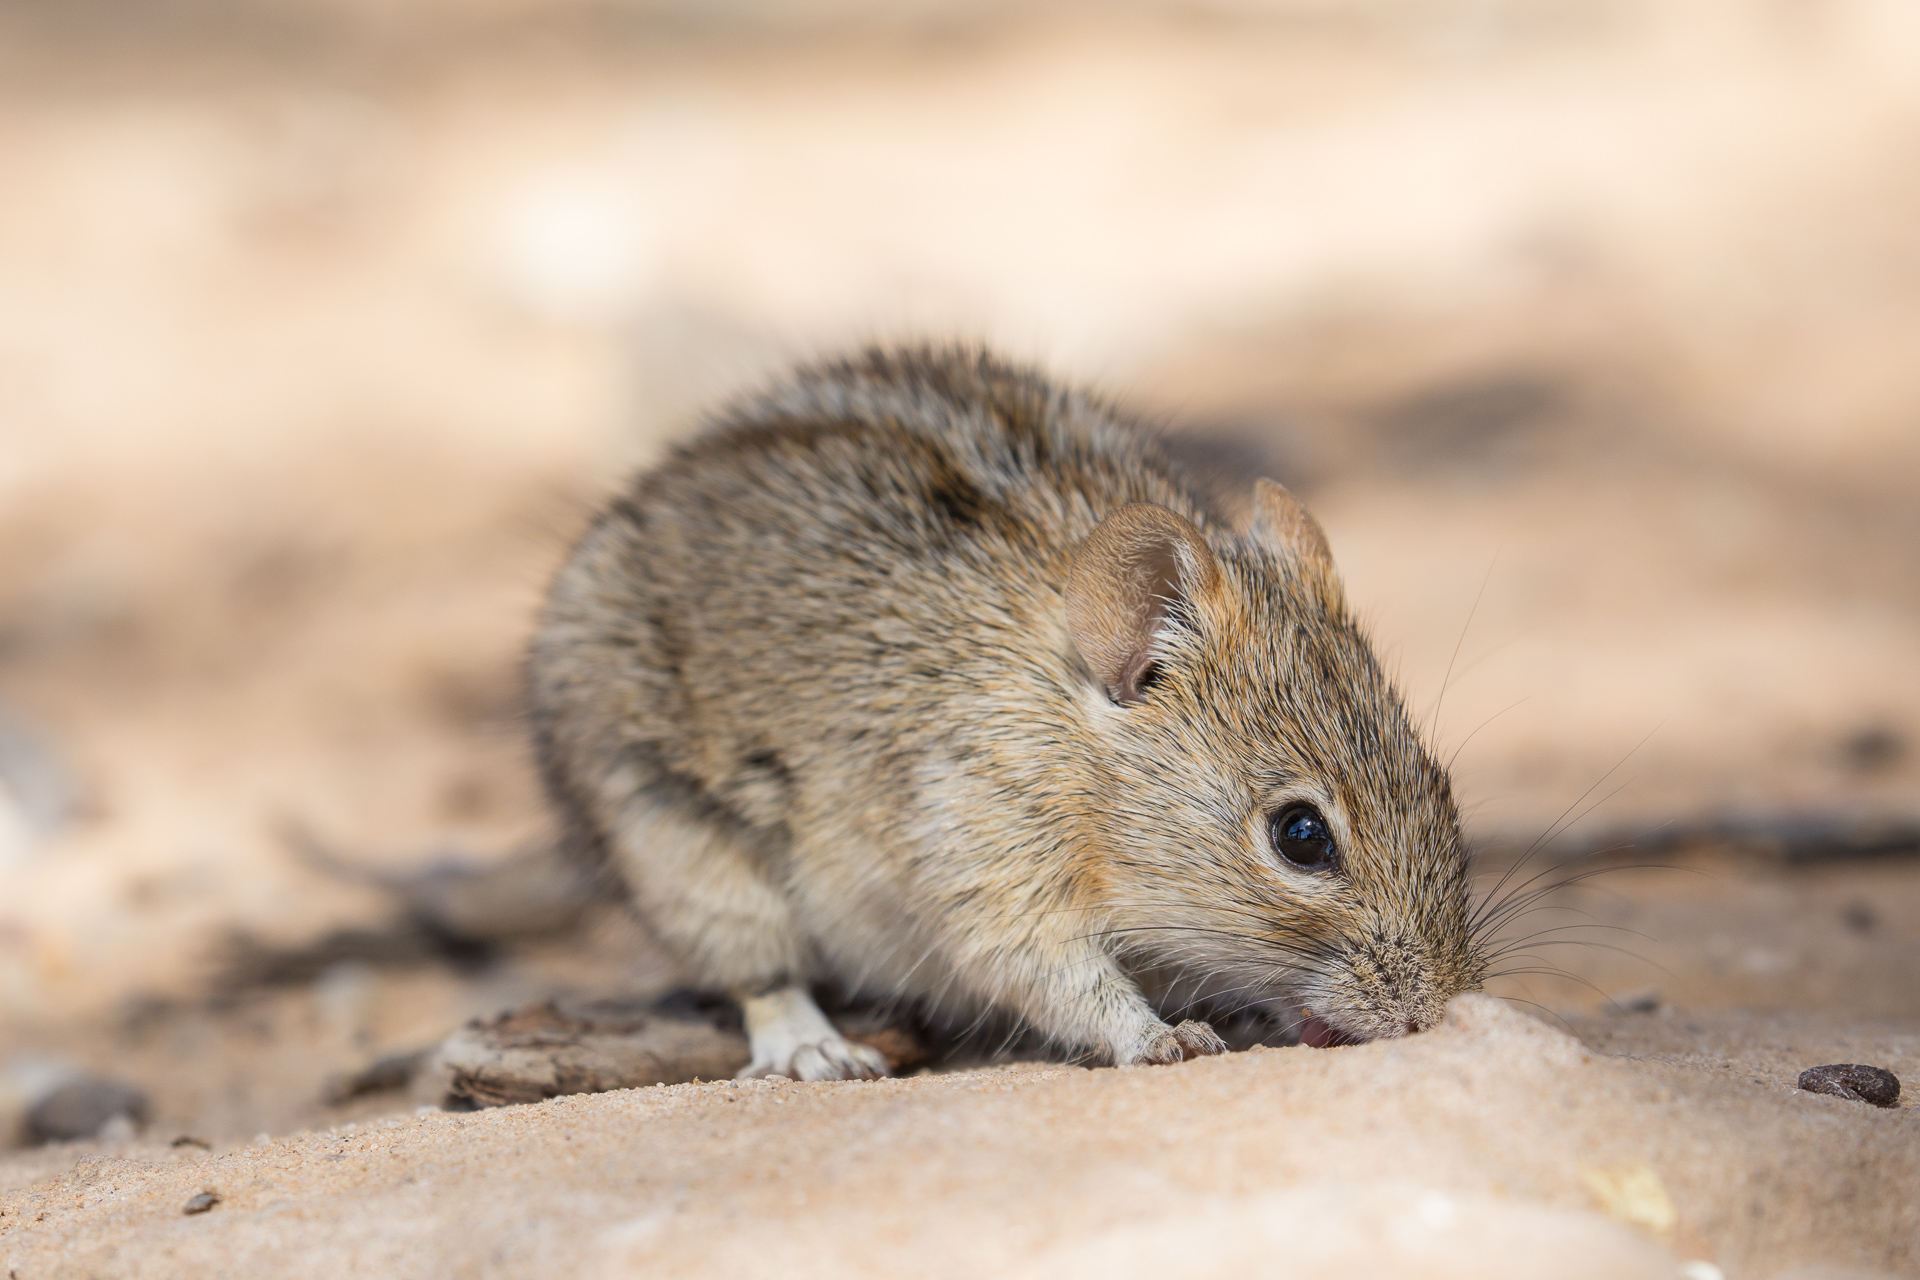 Two-stripped Mouse, Kgalagadi National Park, South Africa